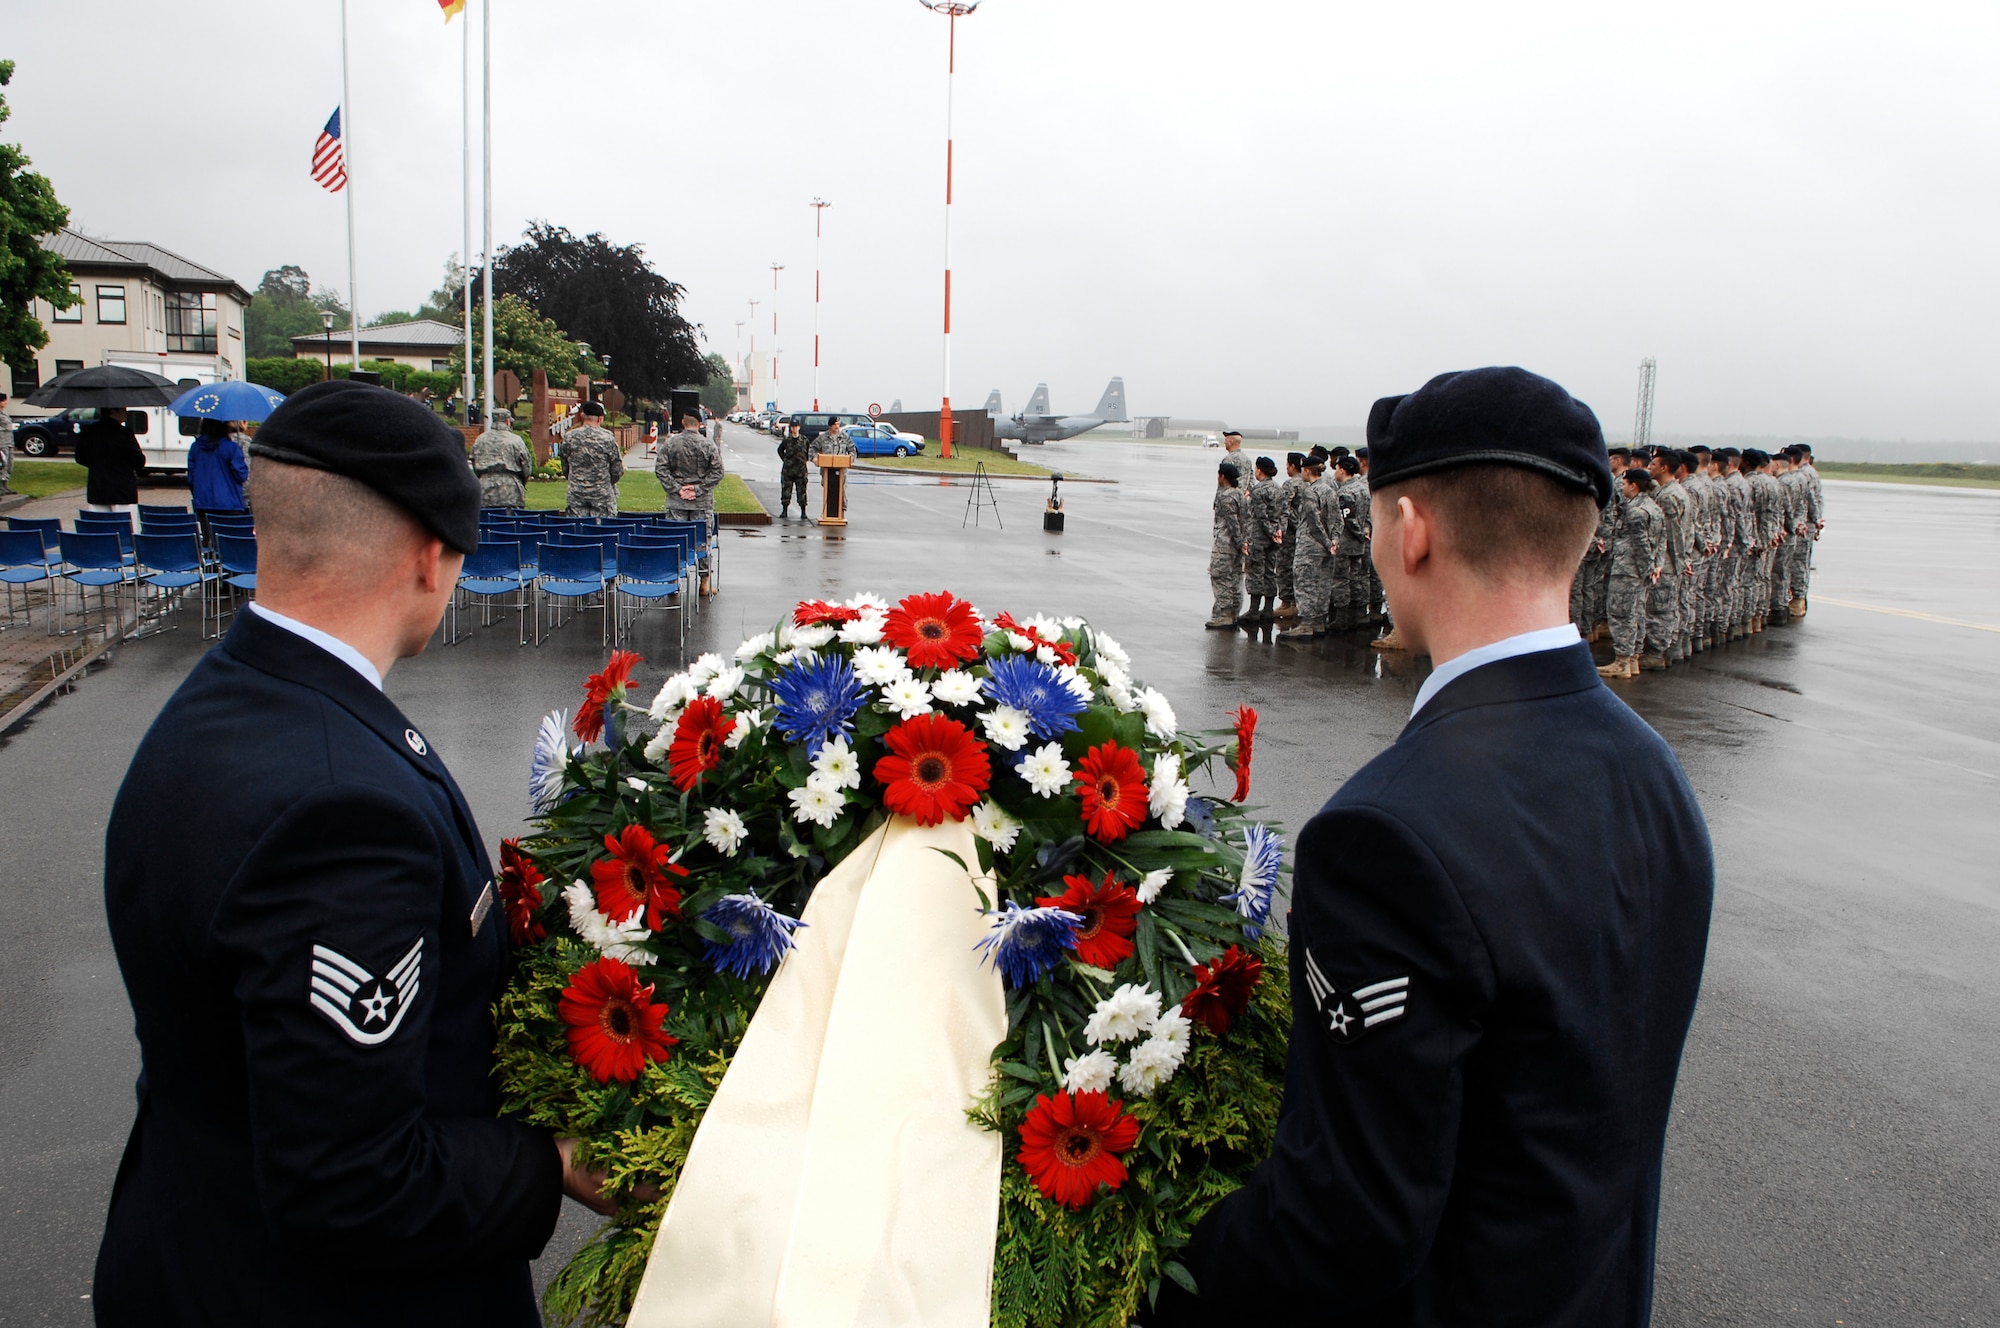 United States Air Force Staff Sgt. Kyle Richards (left) and Senior Airman Joshuah Westmoreland, 435th Security Forces Squadron, laid a wreath during a Final Guard Mount Ceremony, May 15, 2009, Ramstein Air Base, Germany. Final Guard Mount is one of many events taking place in celebration of National Police Week, a solemn period each year where every officer reflects on those who have fallen. (U.S. Air Force photo by Senior Airman Amber Bressler)